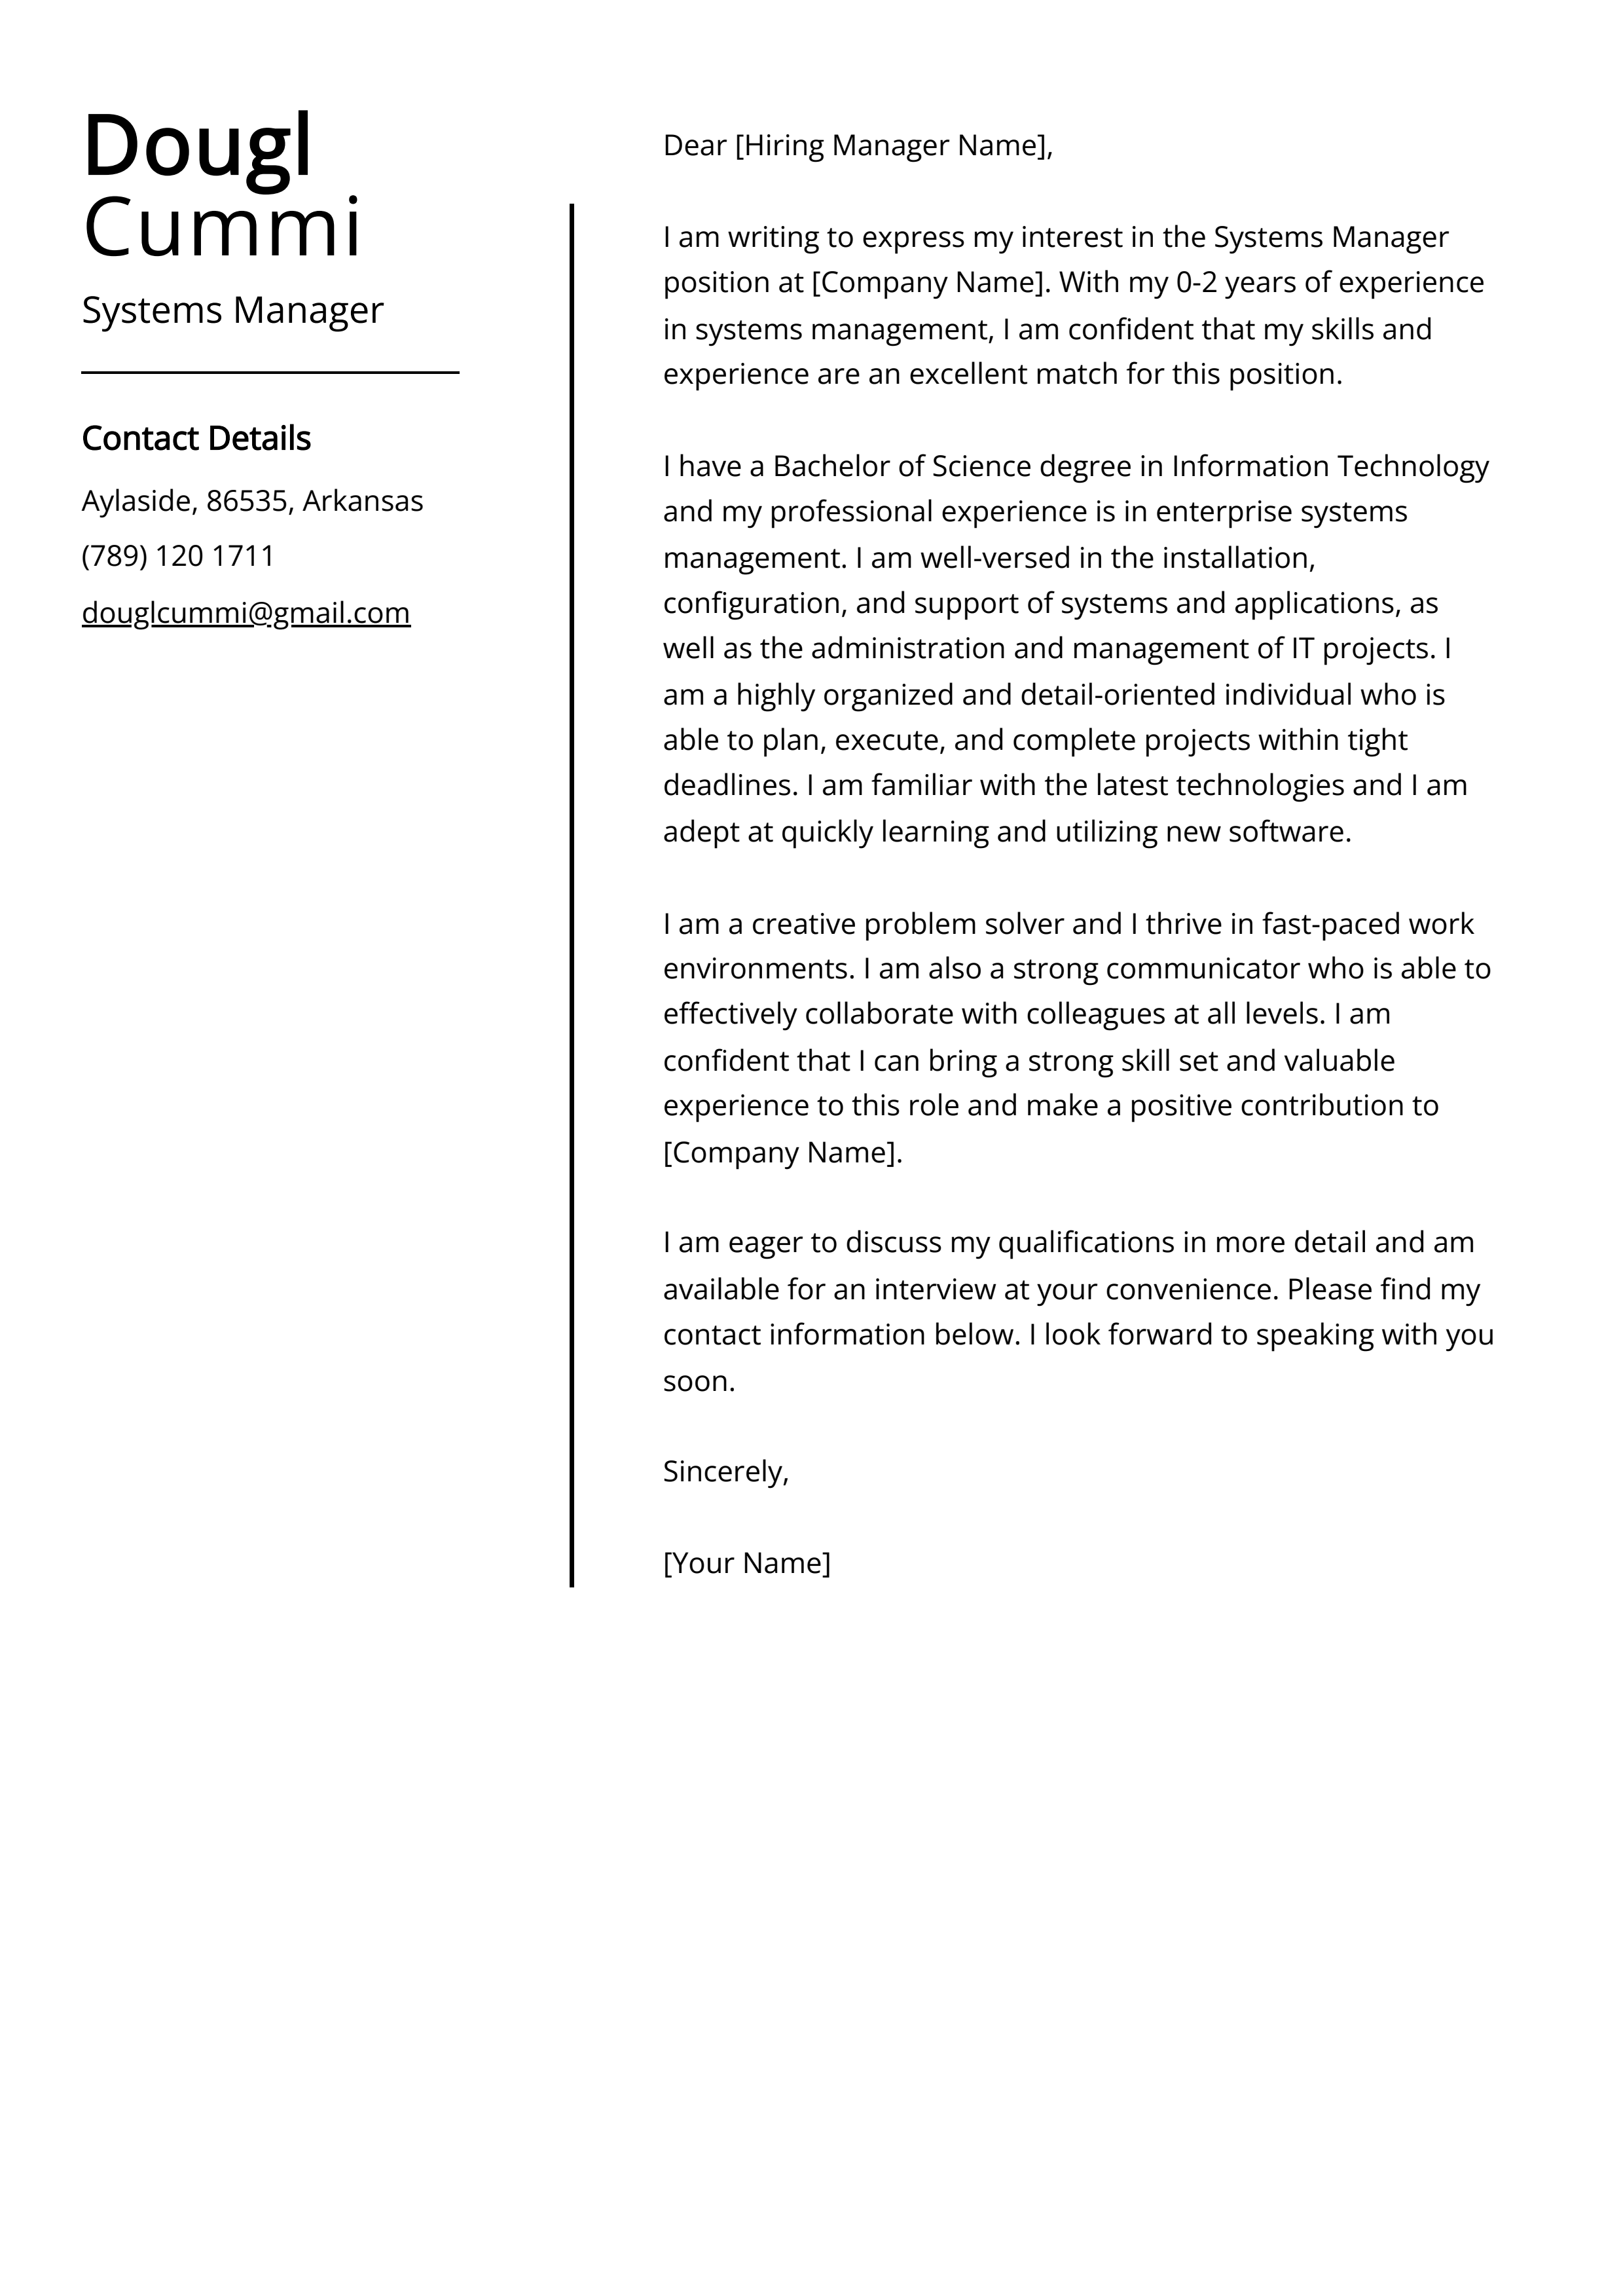 Systems Manager Cover Letter Example